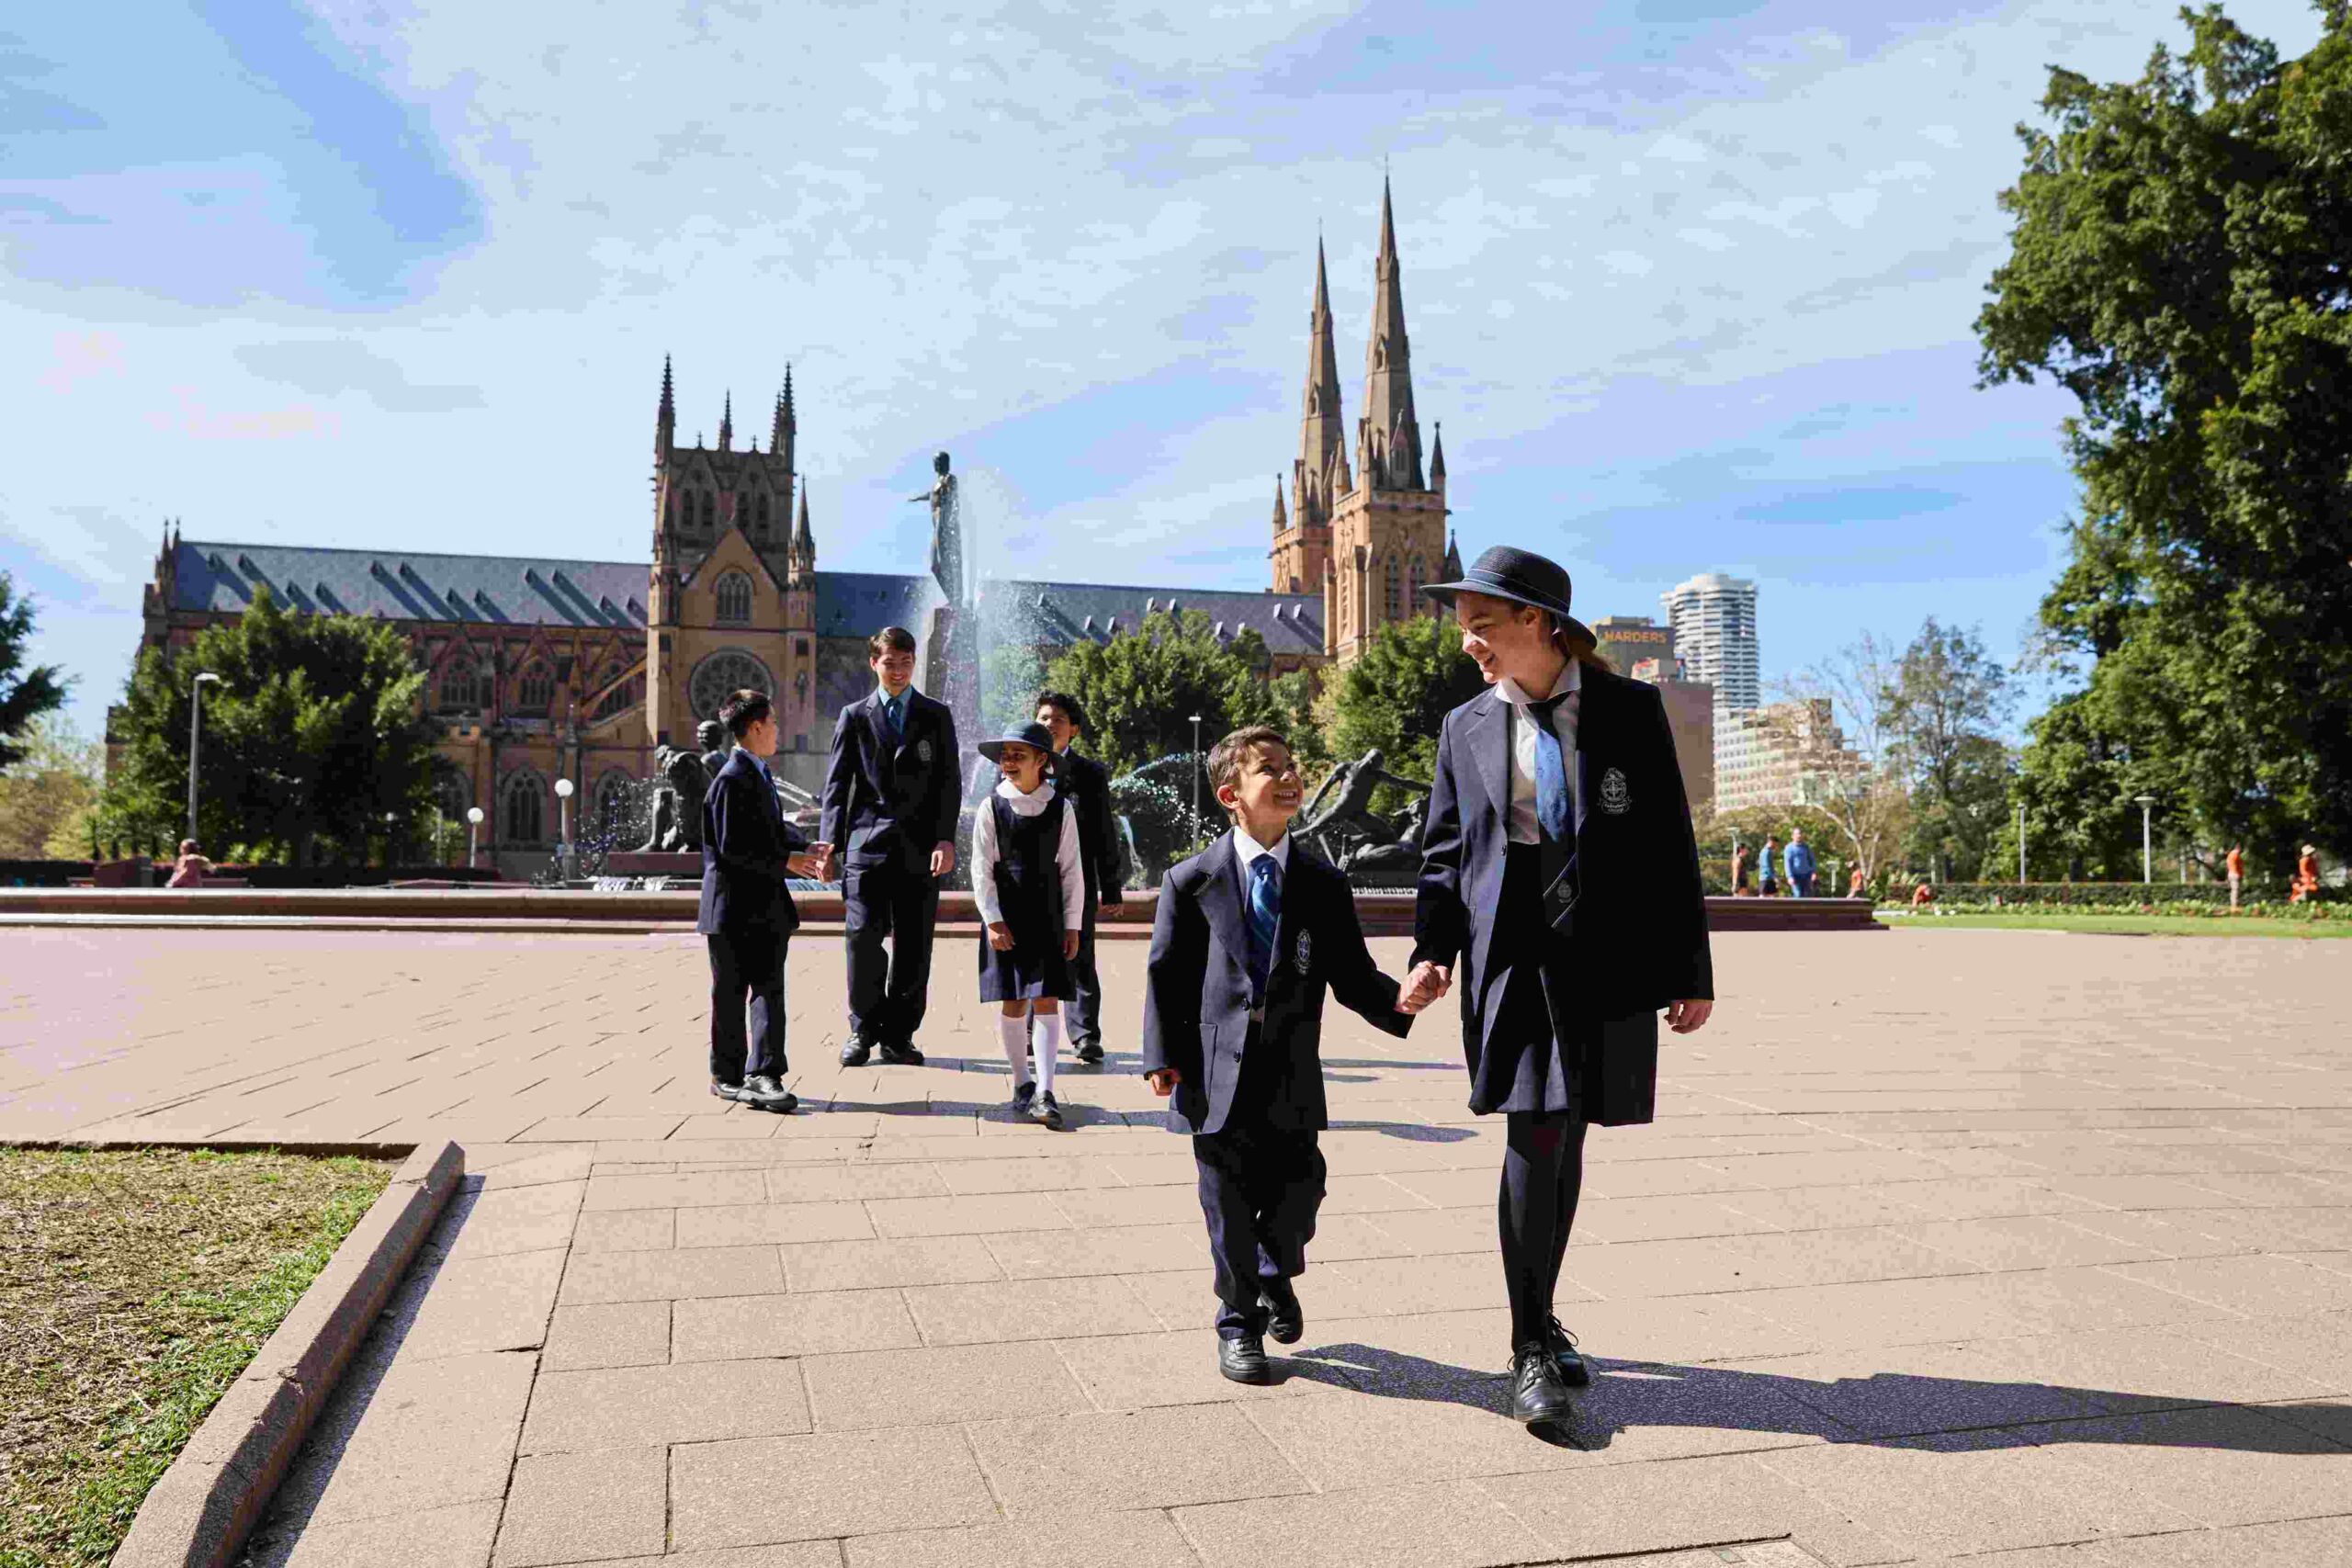 St Mary's Cathedral students, boys and girls of various ages, walk in Hyde Park with the beautiful St Mary's Cathedral as the backdrop.